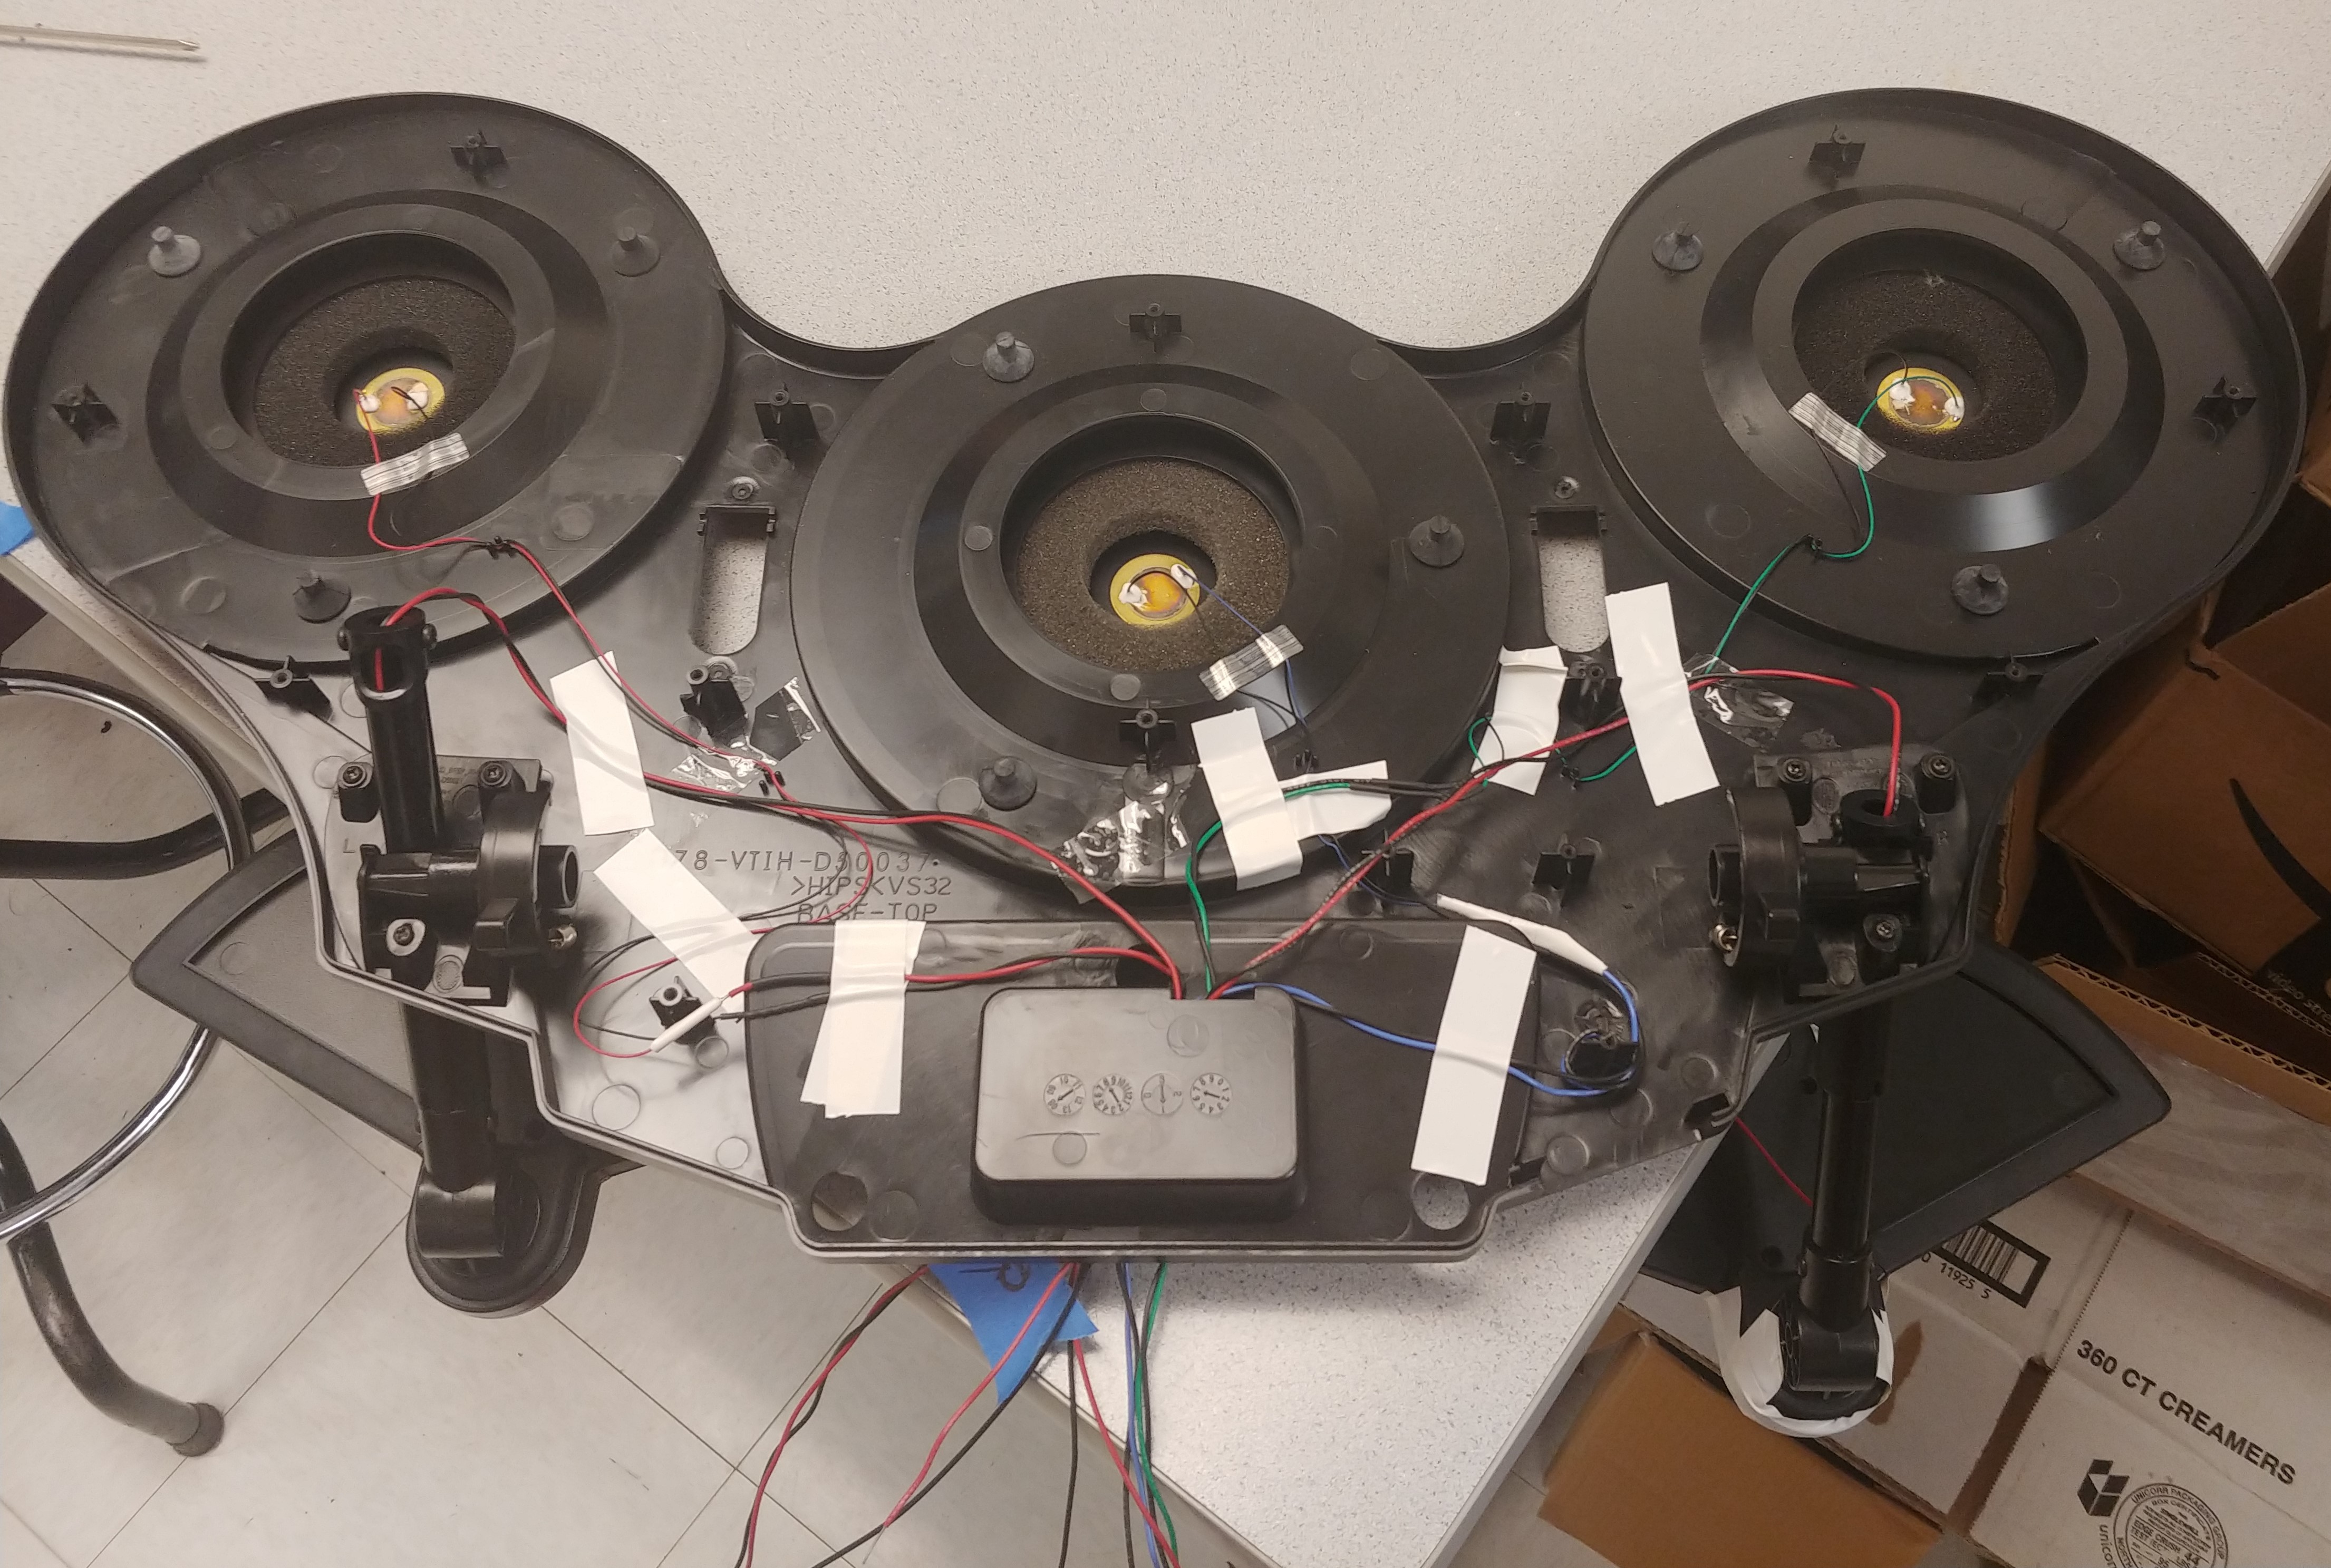 Inside of drum pad chassis with colored wires going from sensors to a hole in the middle